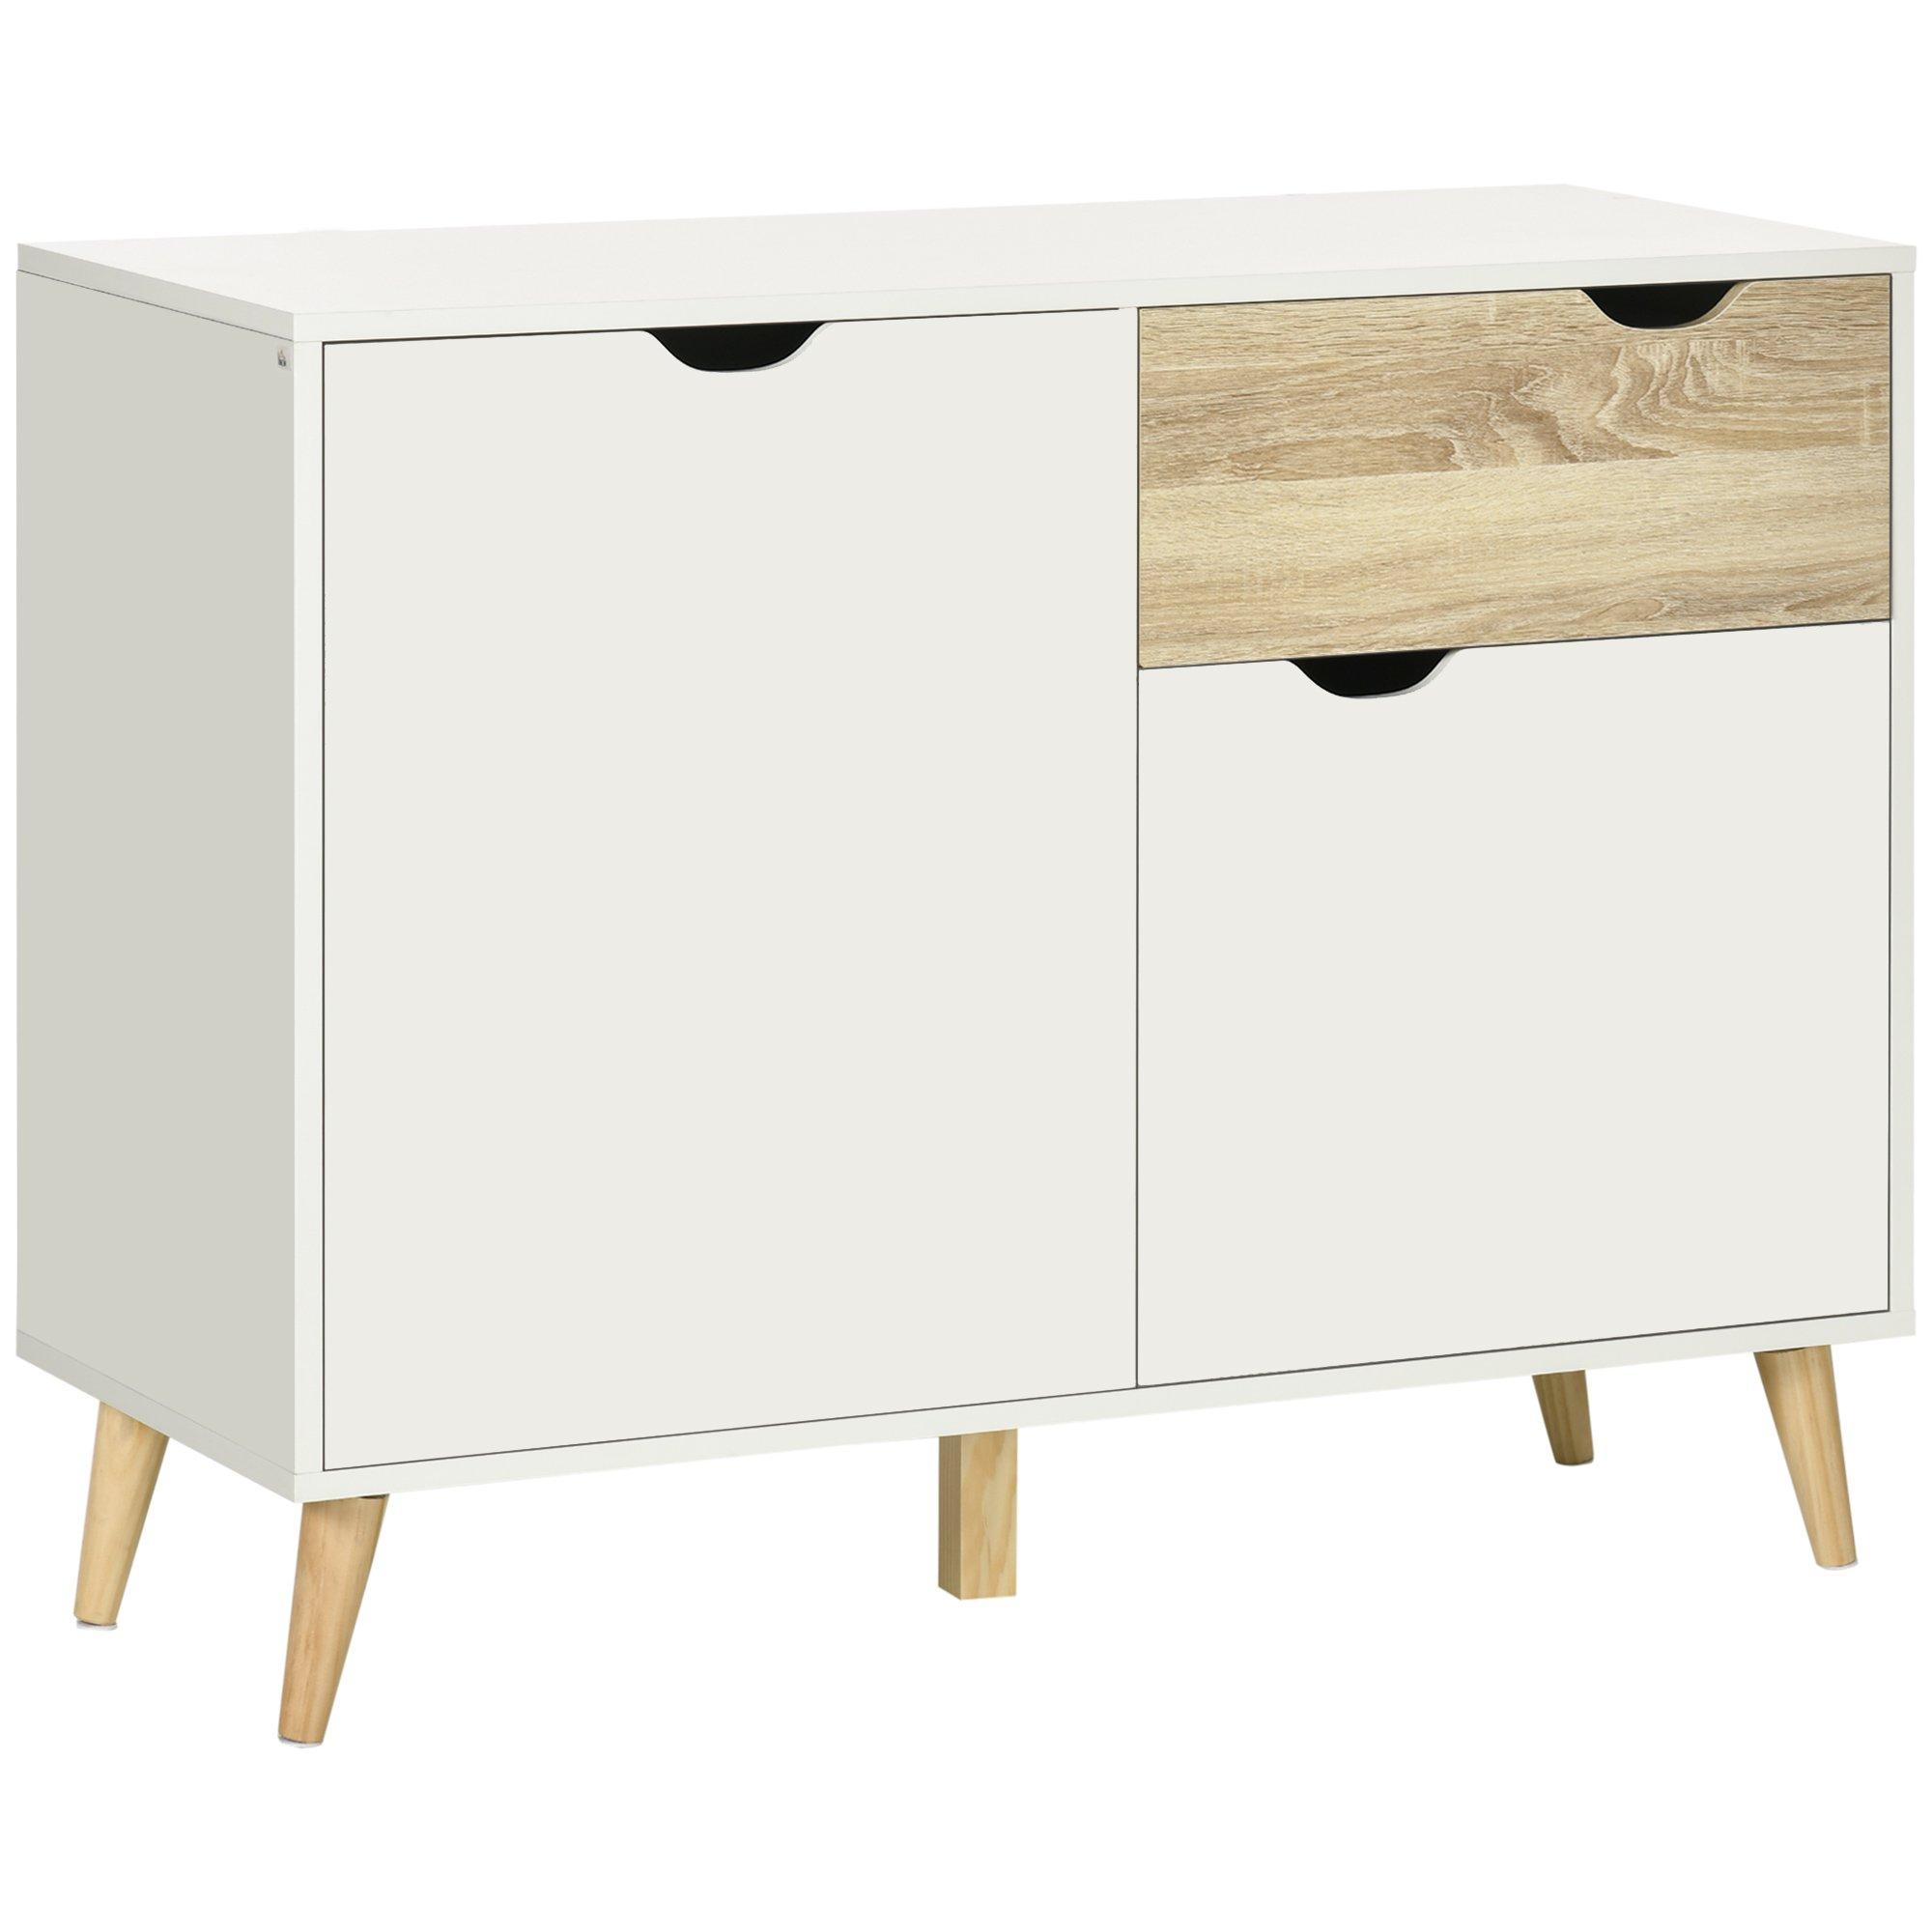 Modern Sideboard Storage Cabinet Accent Cupboard with Drawer